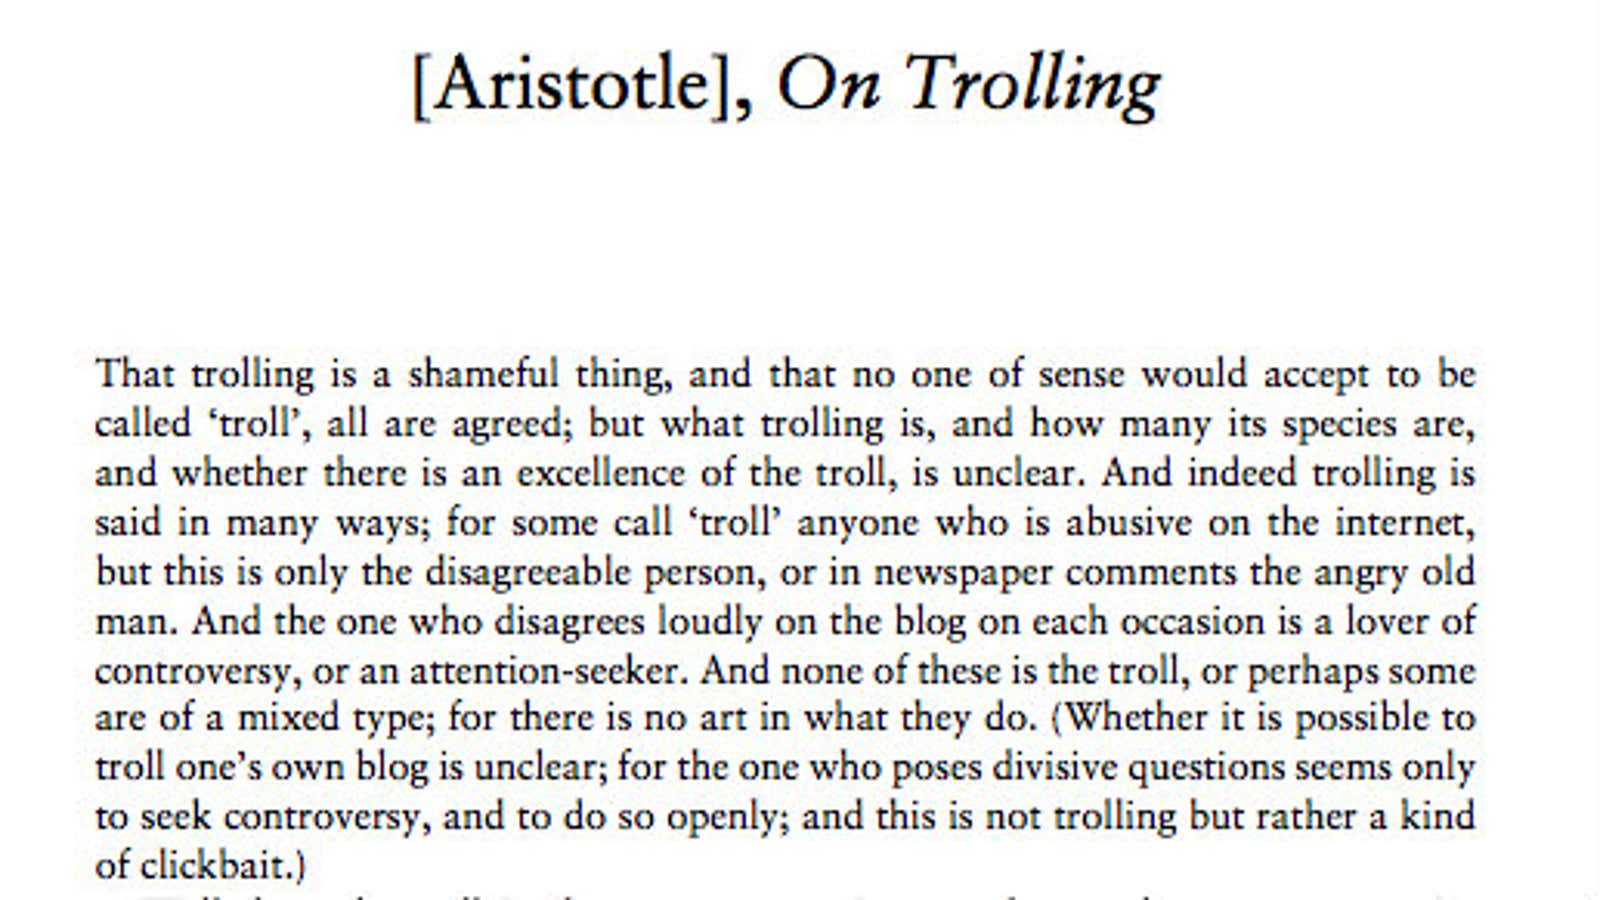 Answering the philosophical question of what exactly it means to troll.